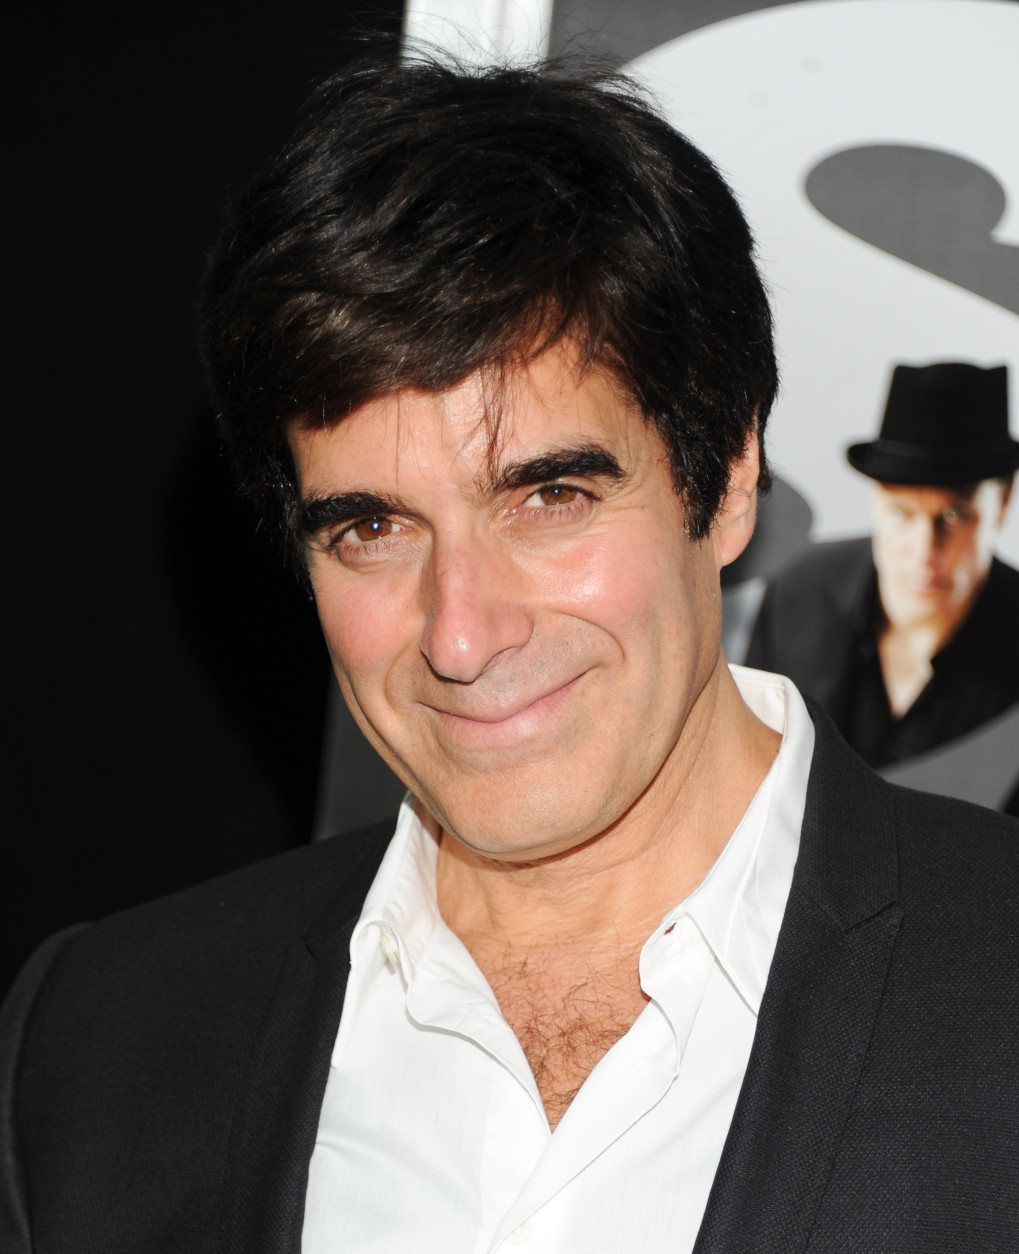 Magician David Copperfield attends the "Now You See Me" premiere at AMC Lincoln Square on Tuesday, May 21, 2013 in New York. (Photo by Evan Agostini/Invision/AP)